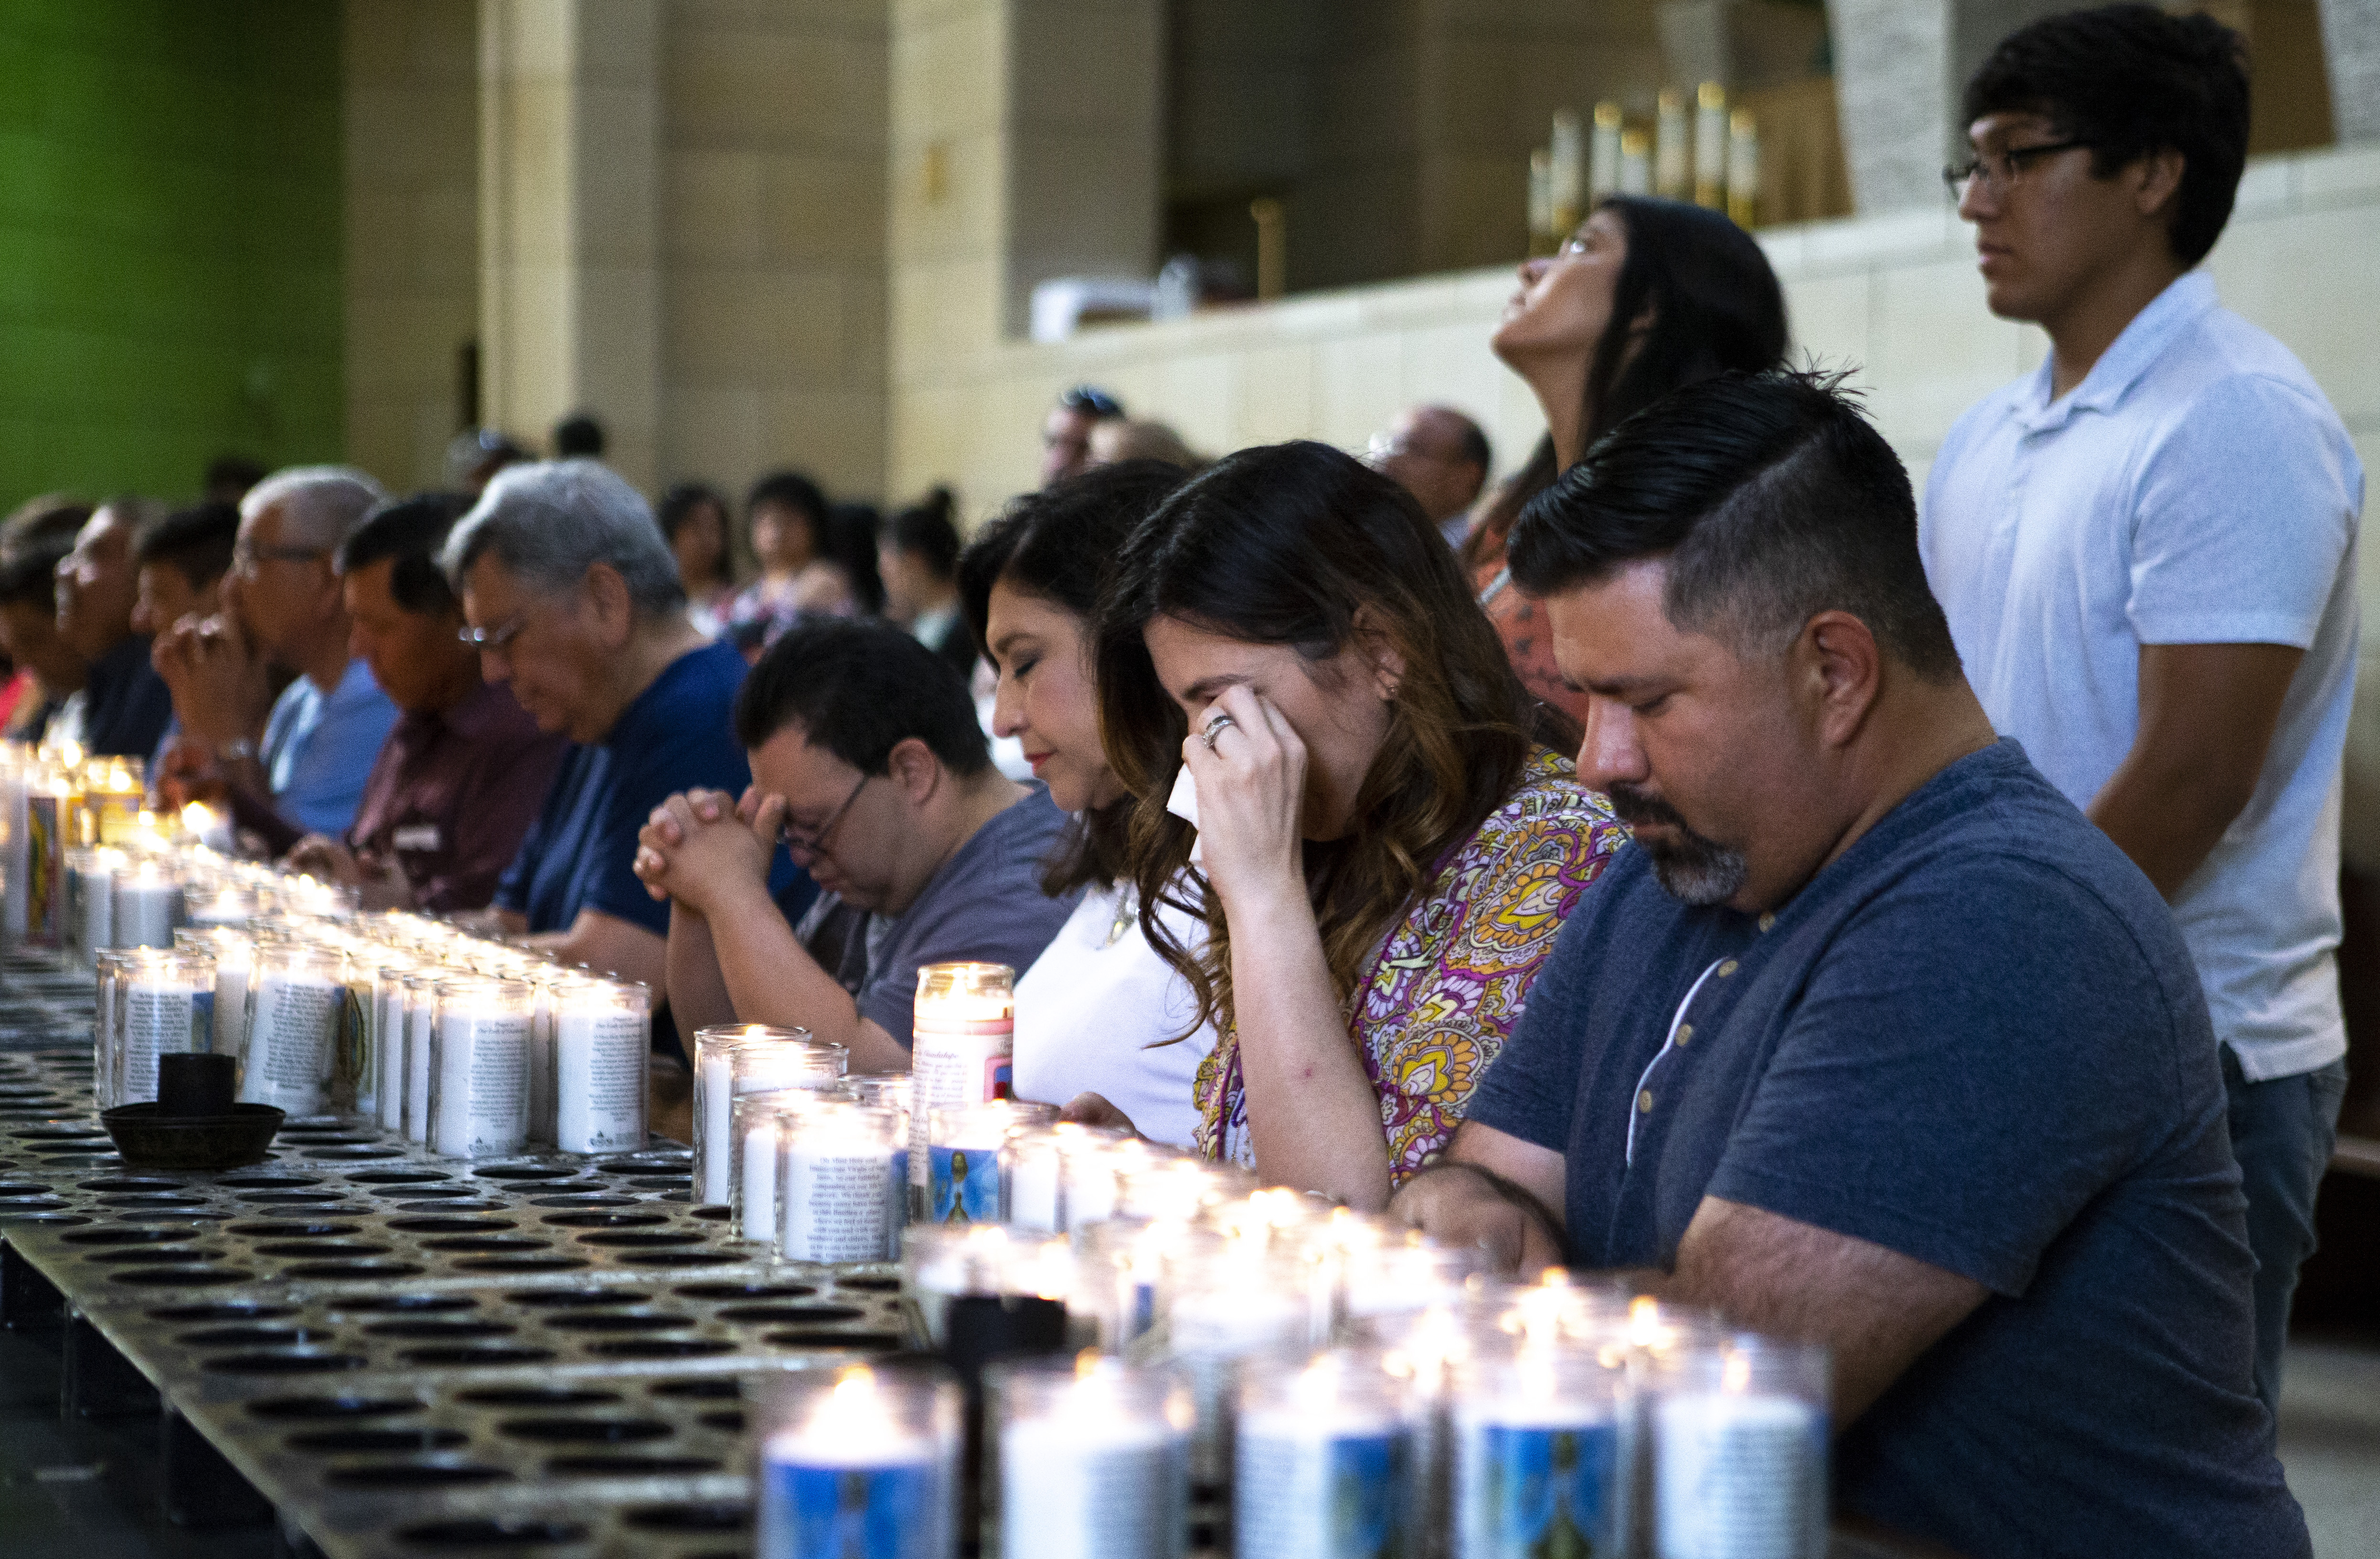 US bishops on fact-finding mission on immigrant detention at US-Mexican border